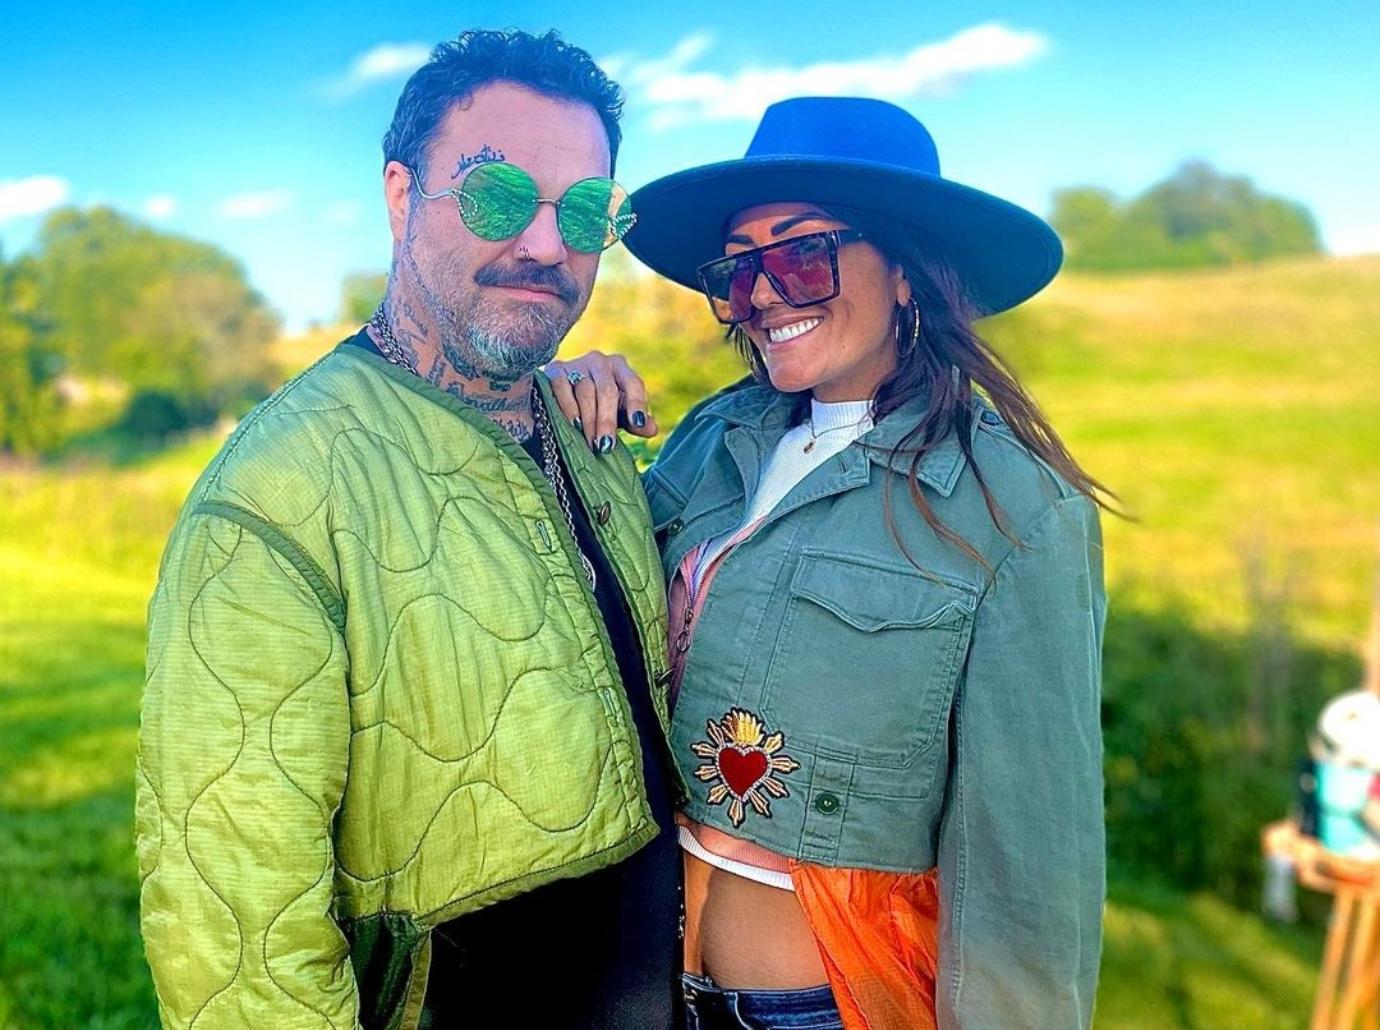 Bam Margera Looks Healthy At 1 Month Sober After Rehab Stint picture